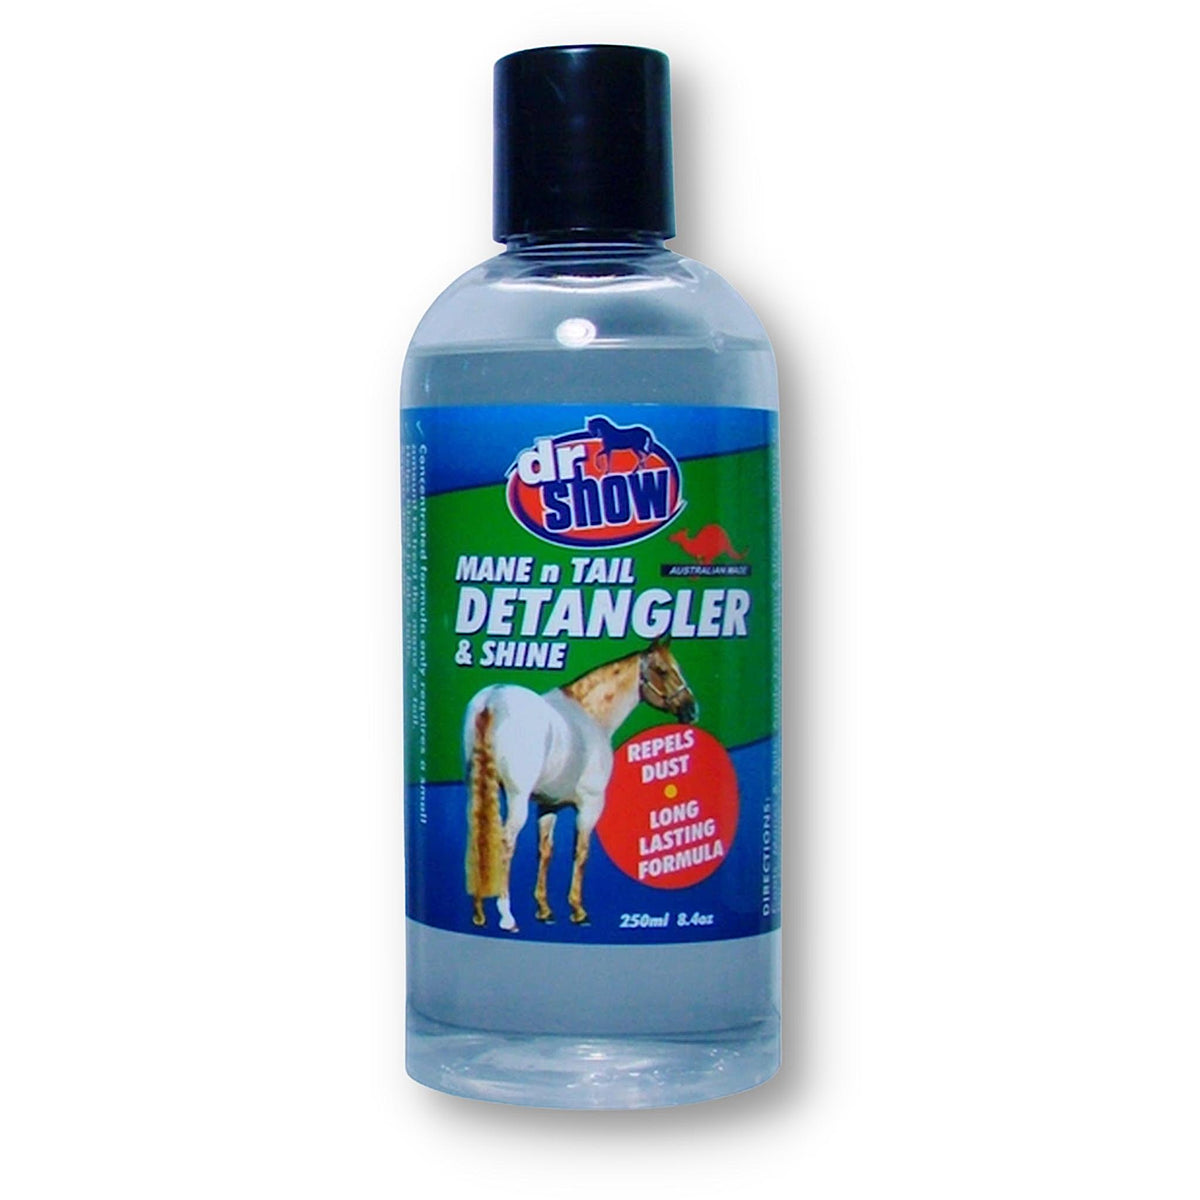 Cylindrical transparent bottle of mane and tail detangler with label around middle.